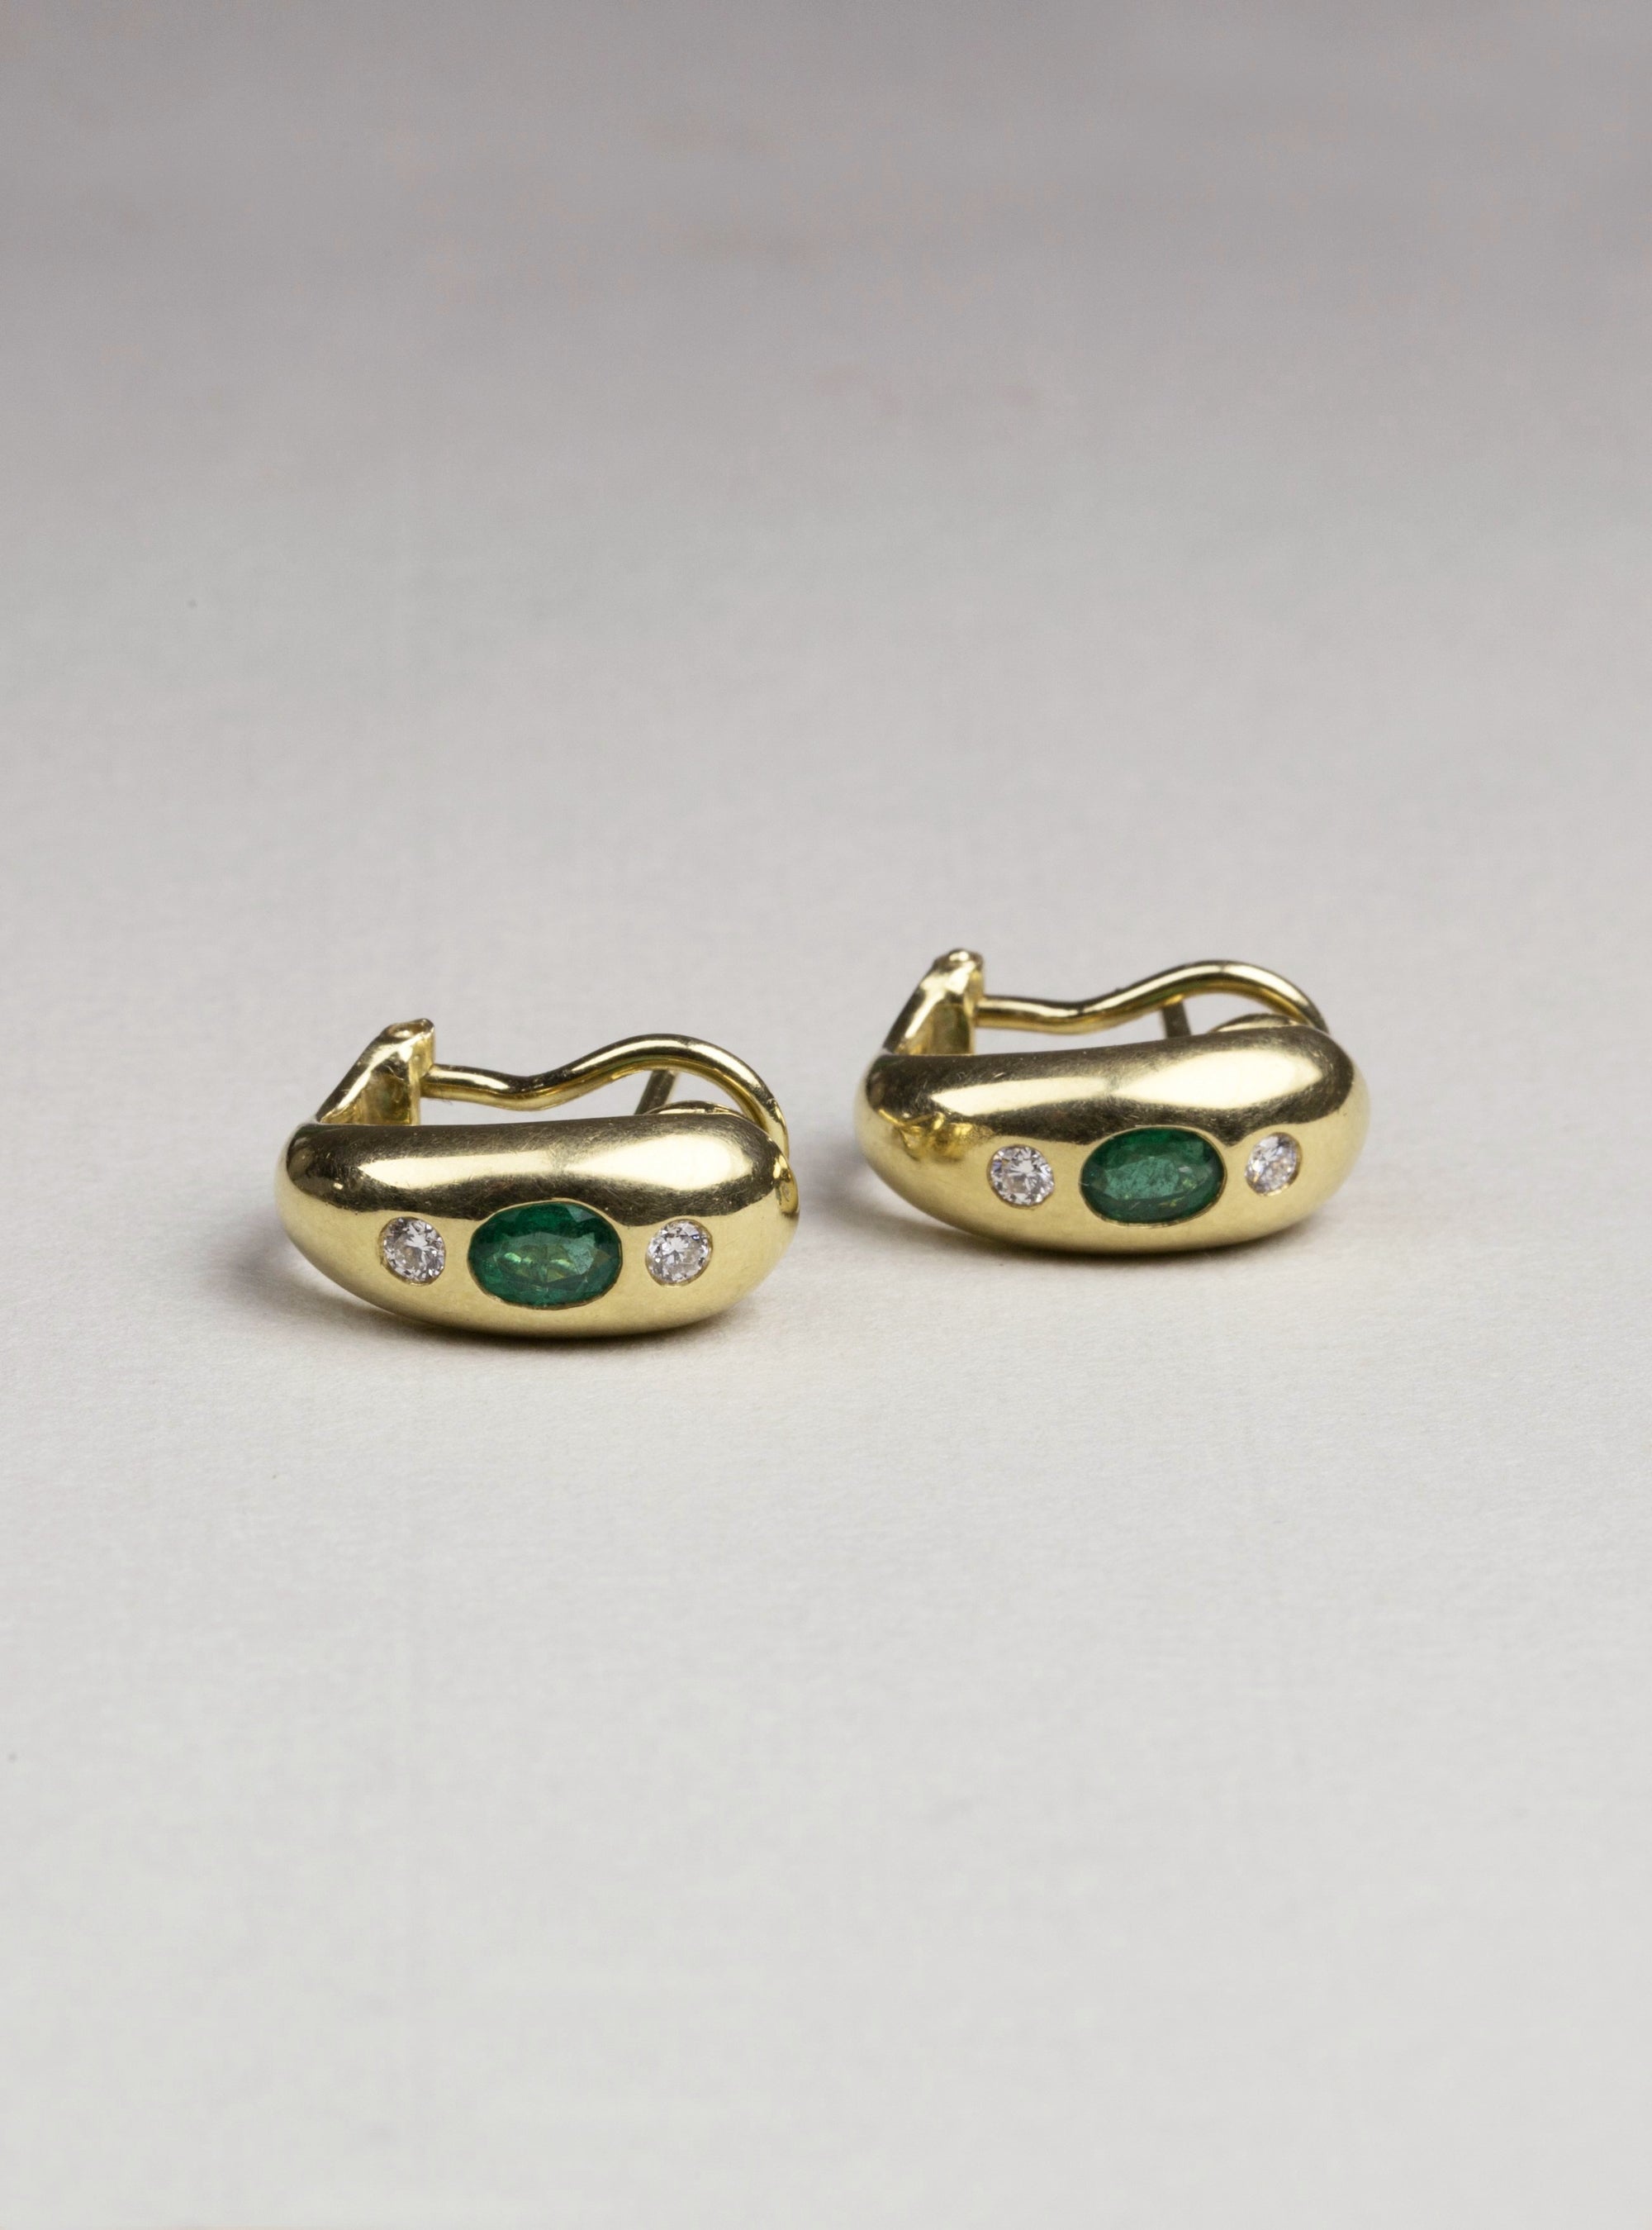 Vintage 18ct Gold Earrings with Emerald and Diamonds